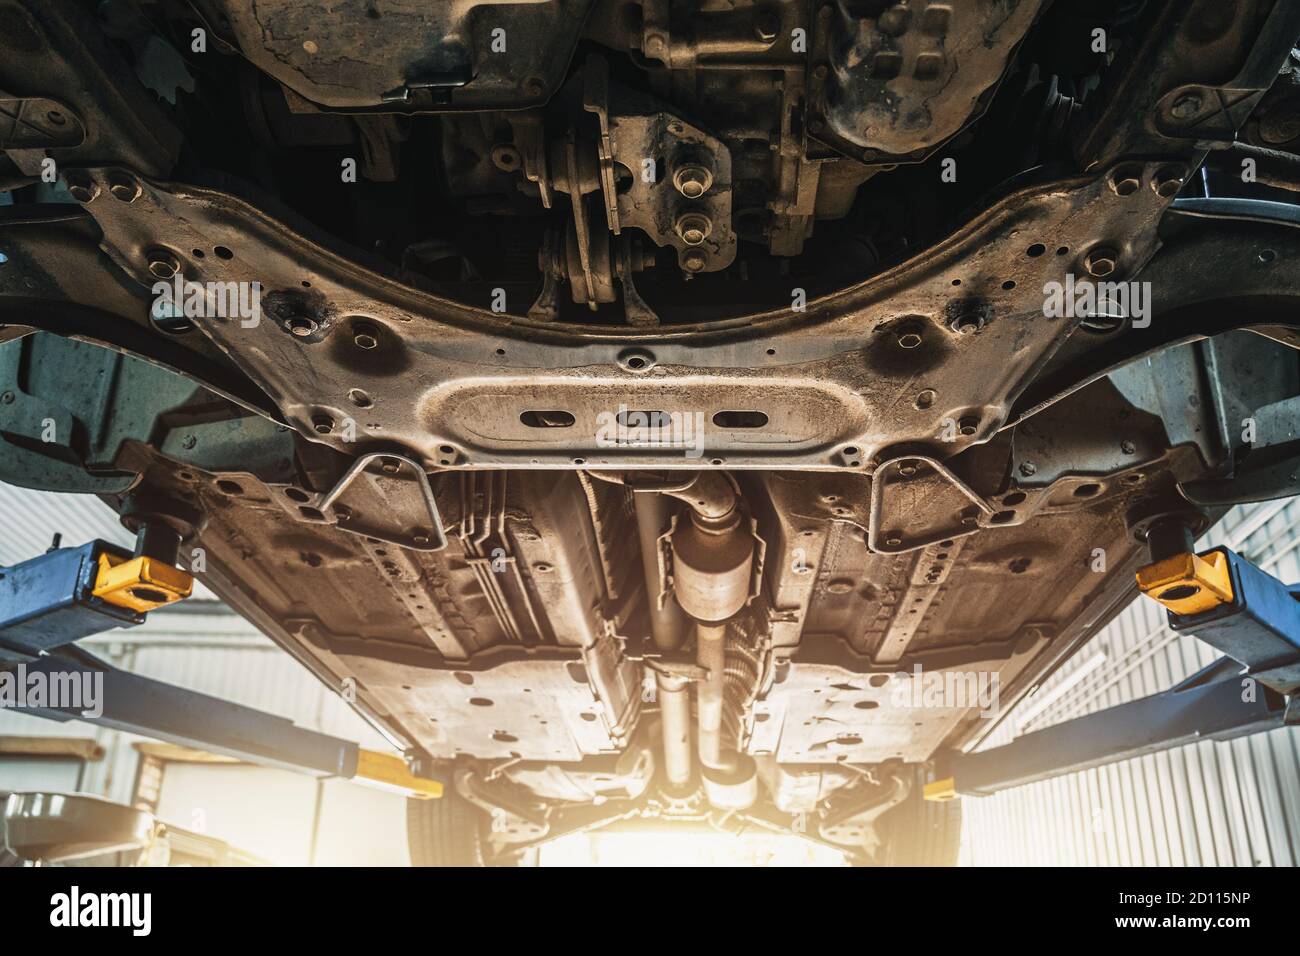 Car on lift in auto service for maintenance and repair, bottom view of car from below. Stock Photo